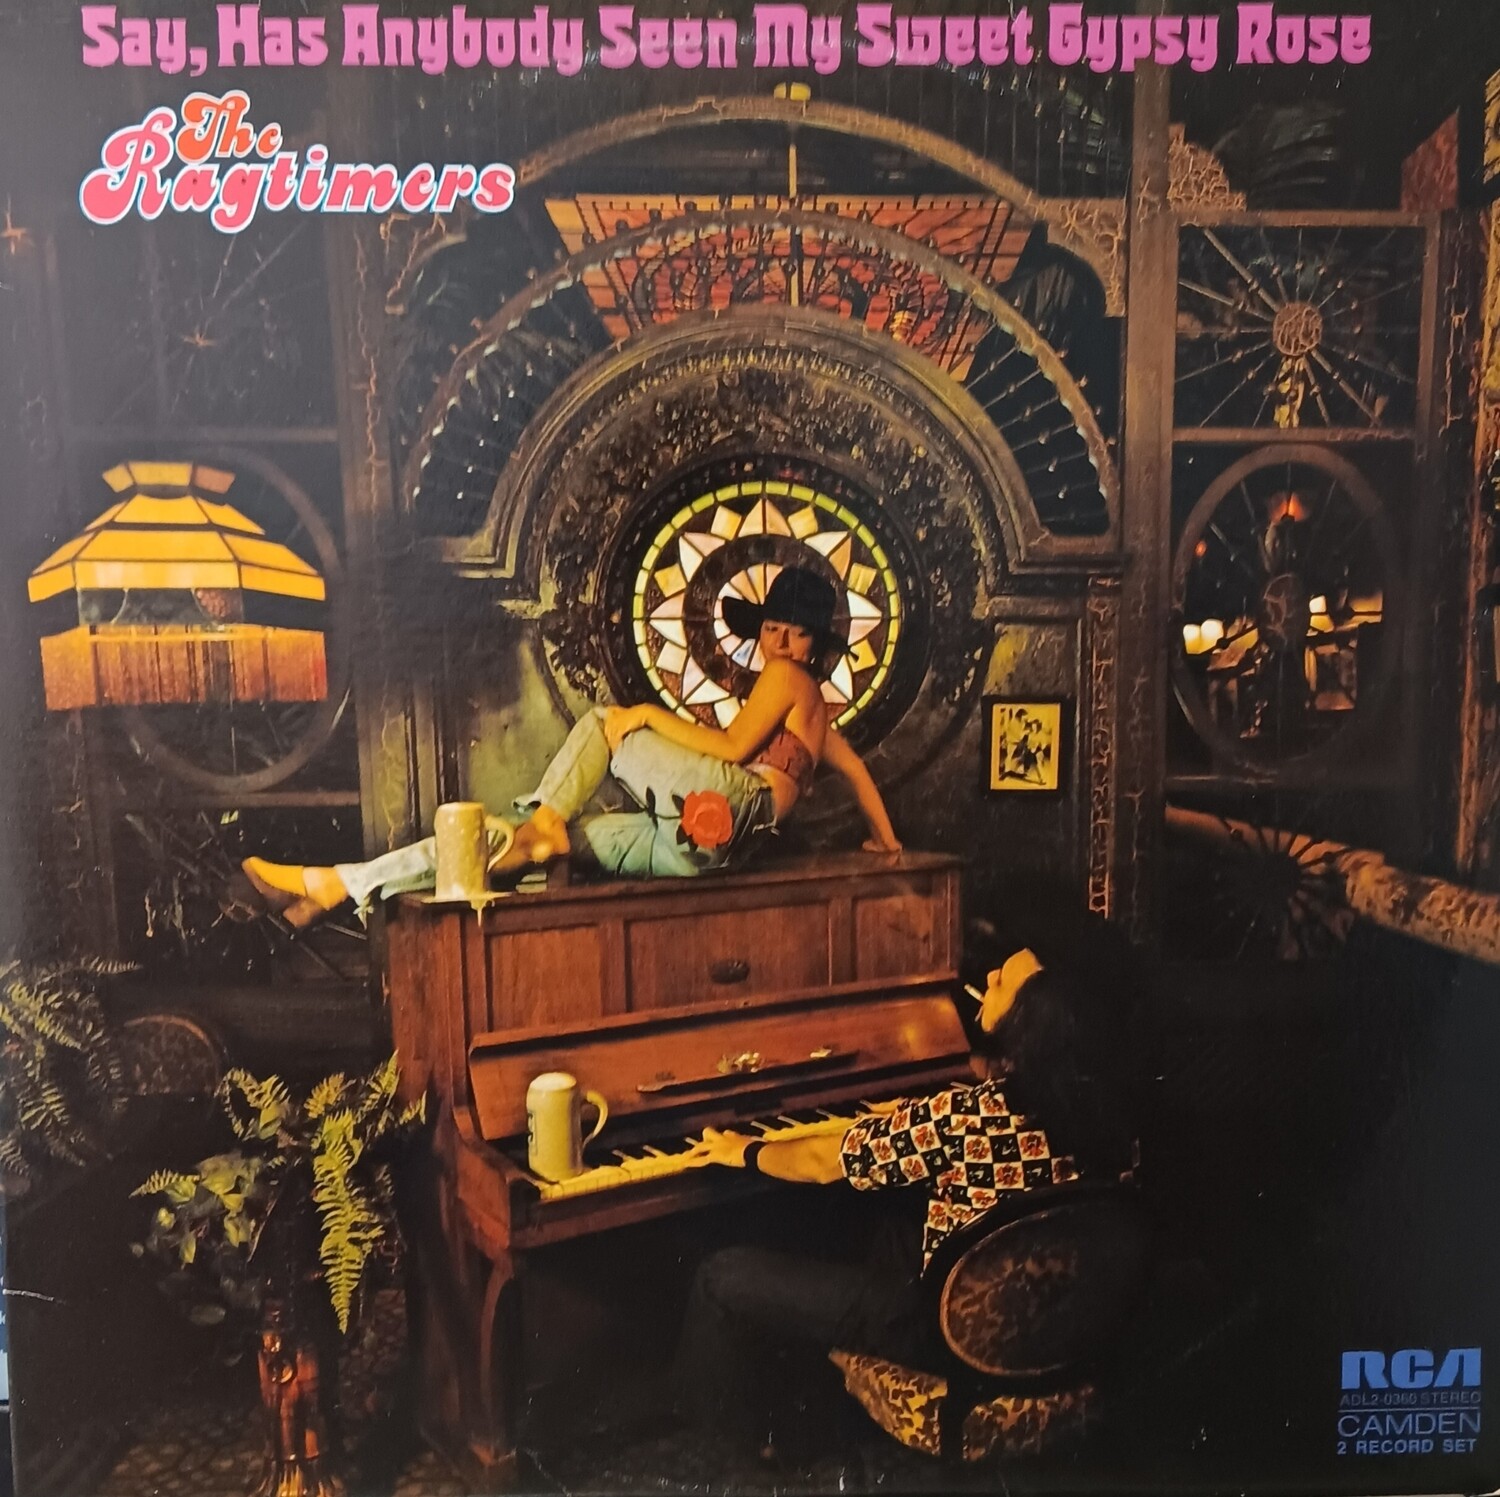 THE RAGTIMERS - Say, has anybody seen my sweet gypsy rose